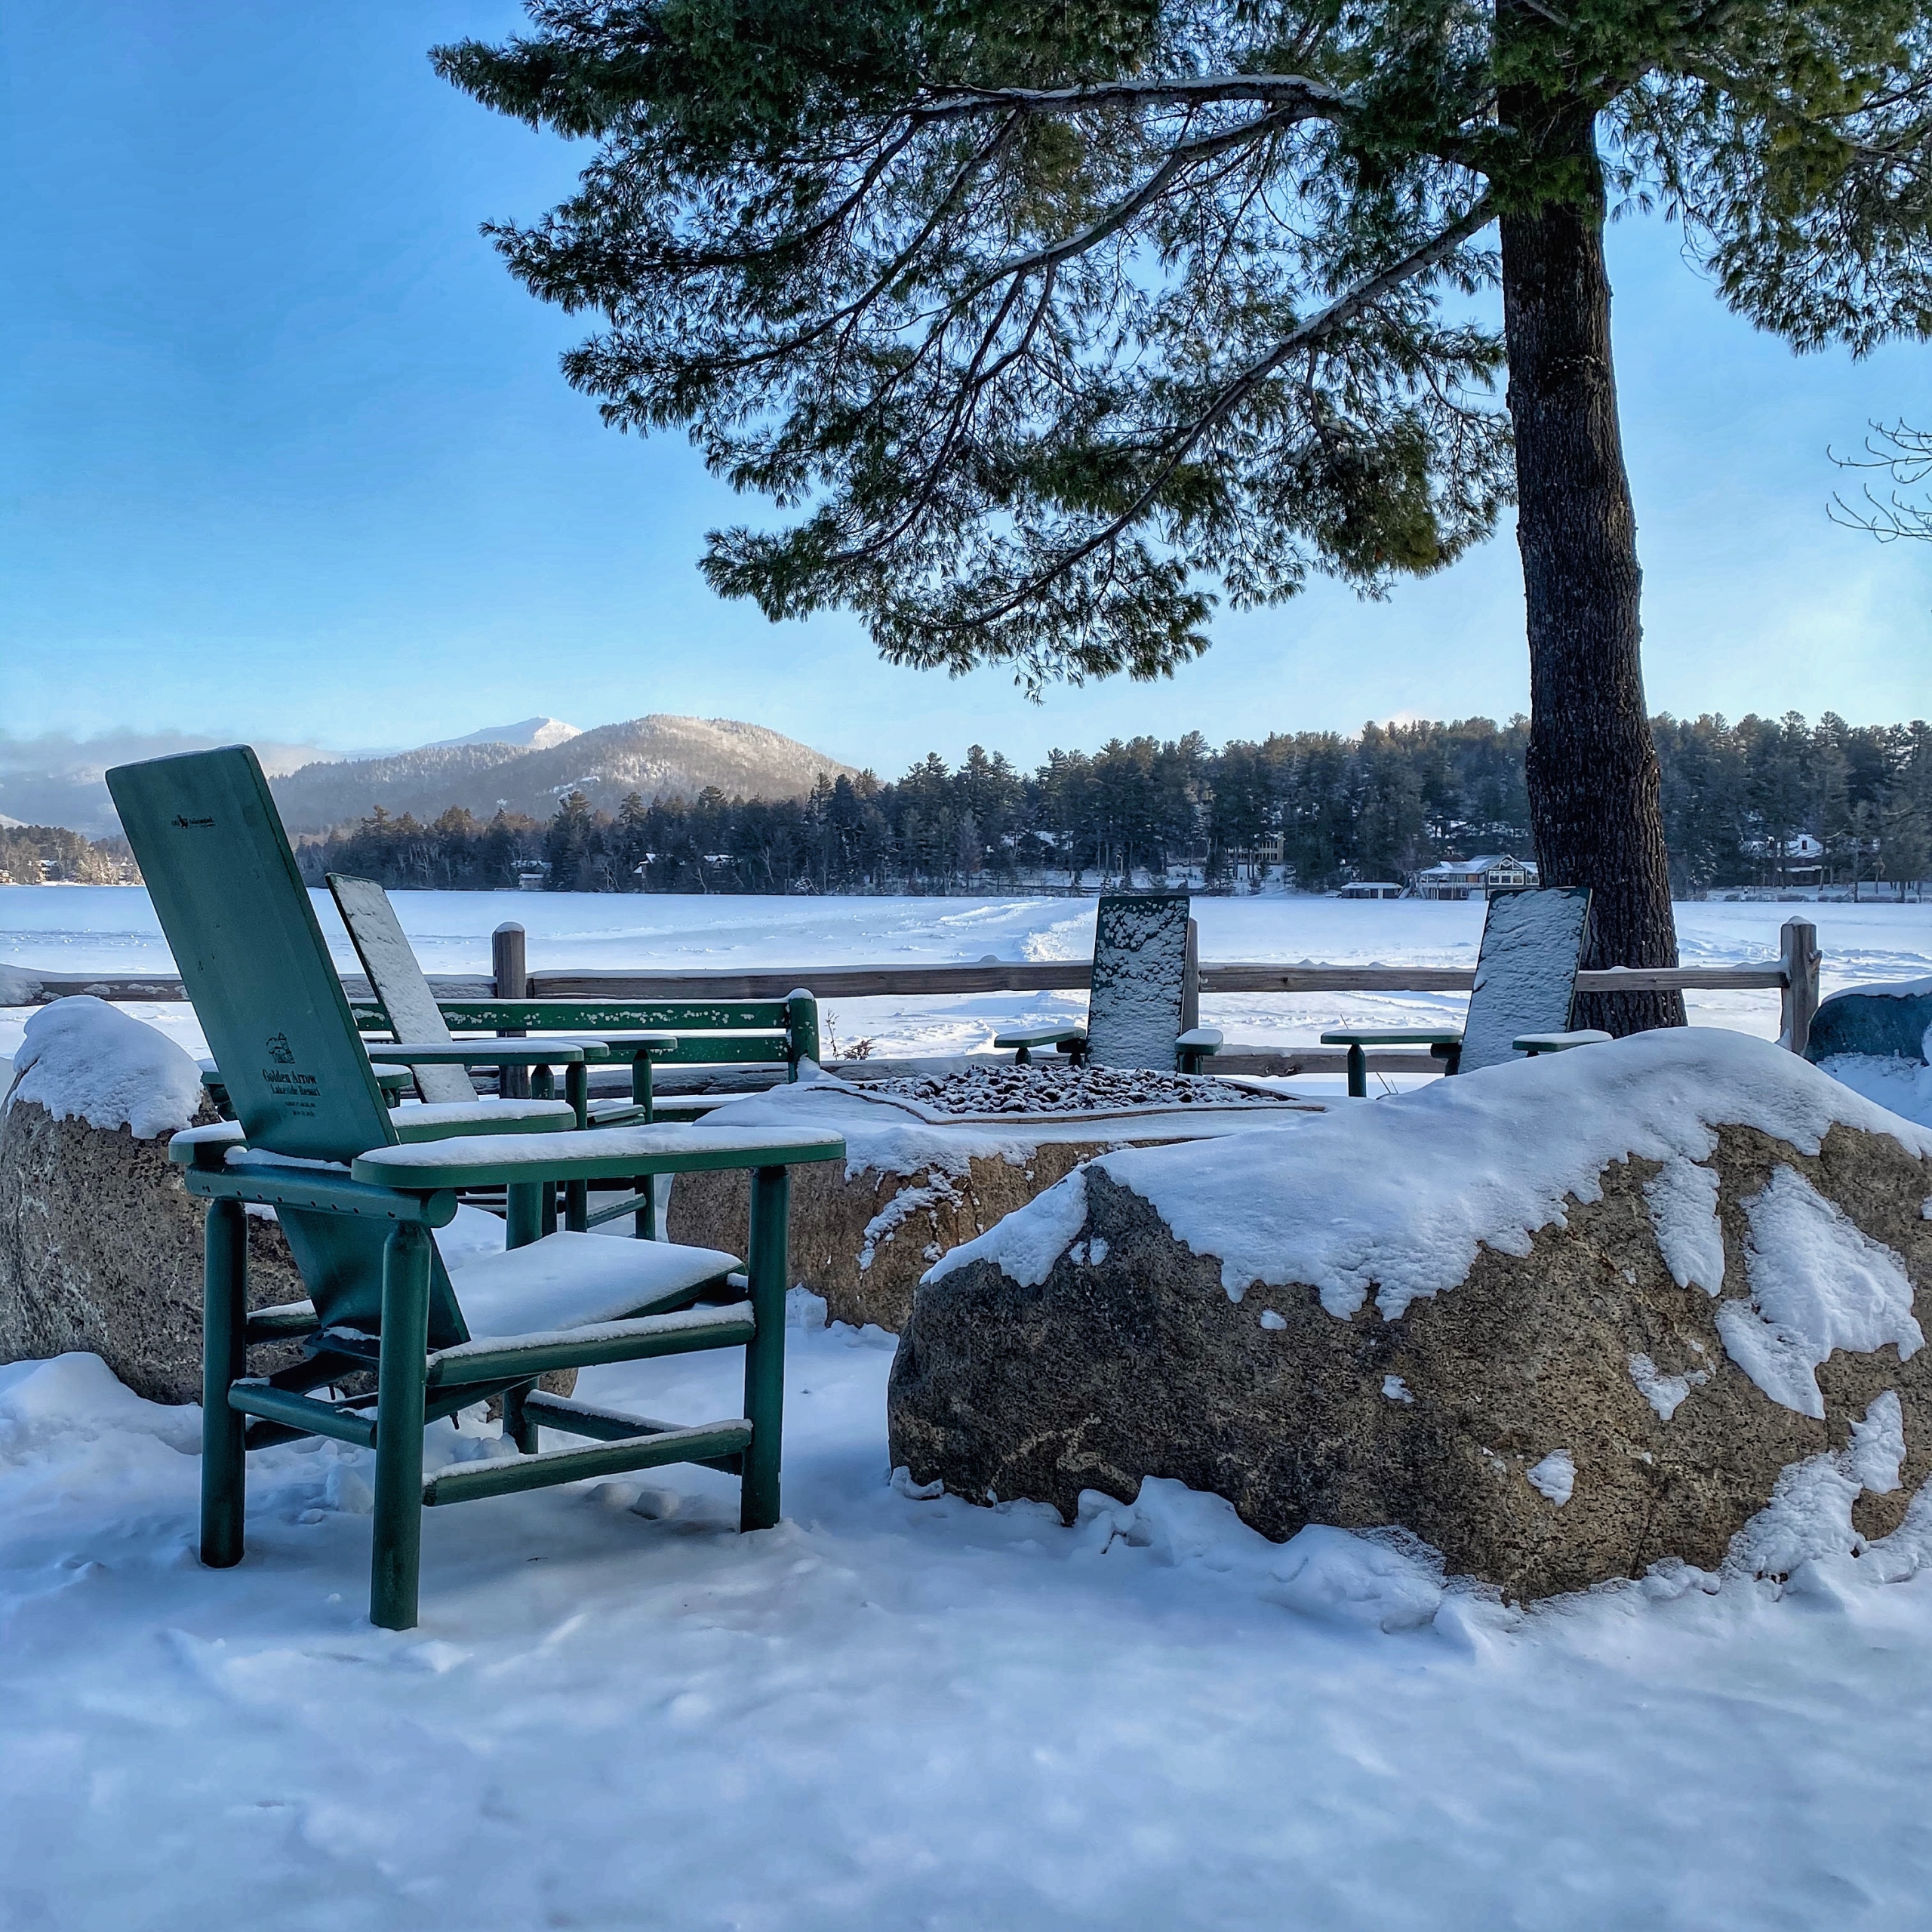 Winter firepit and Adirondack chairs covered in snow